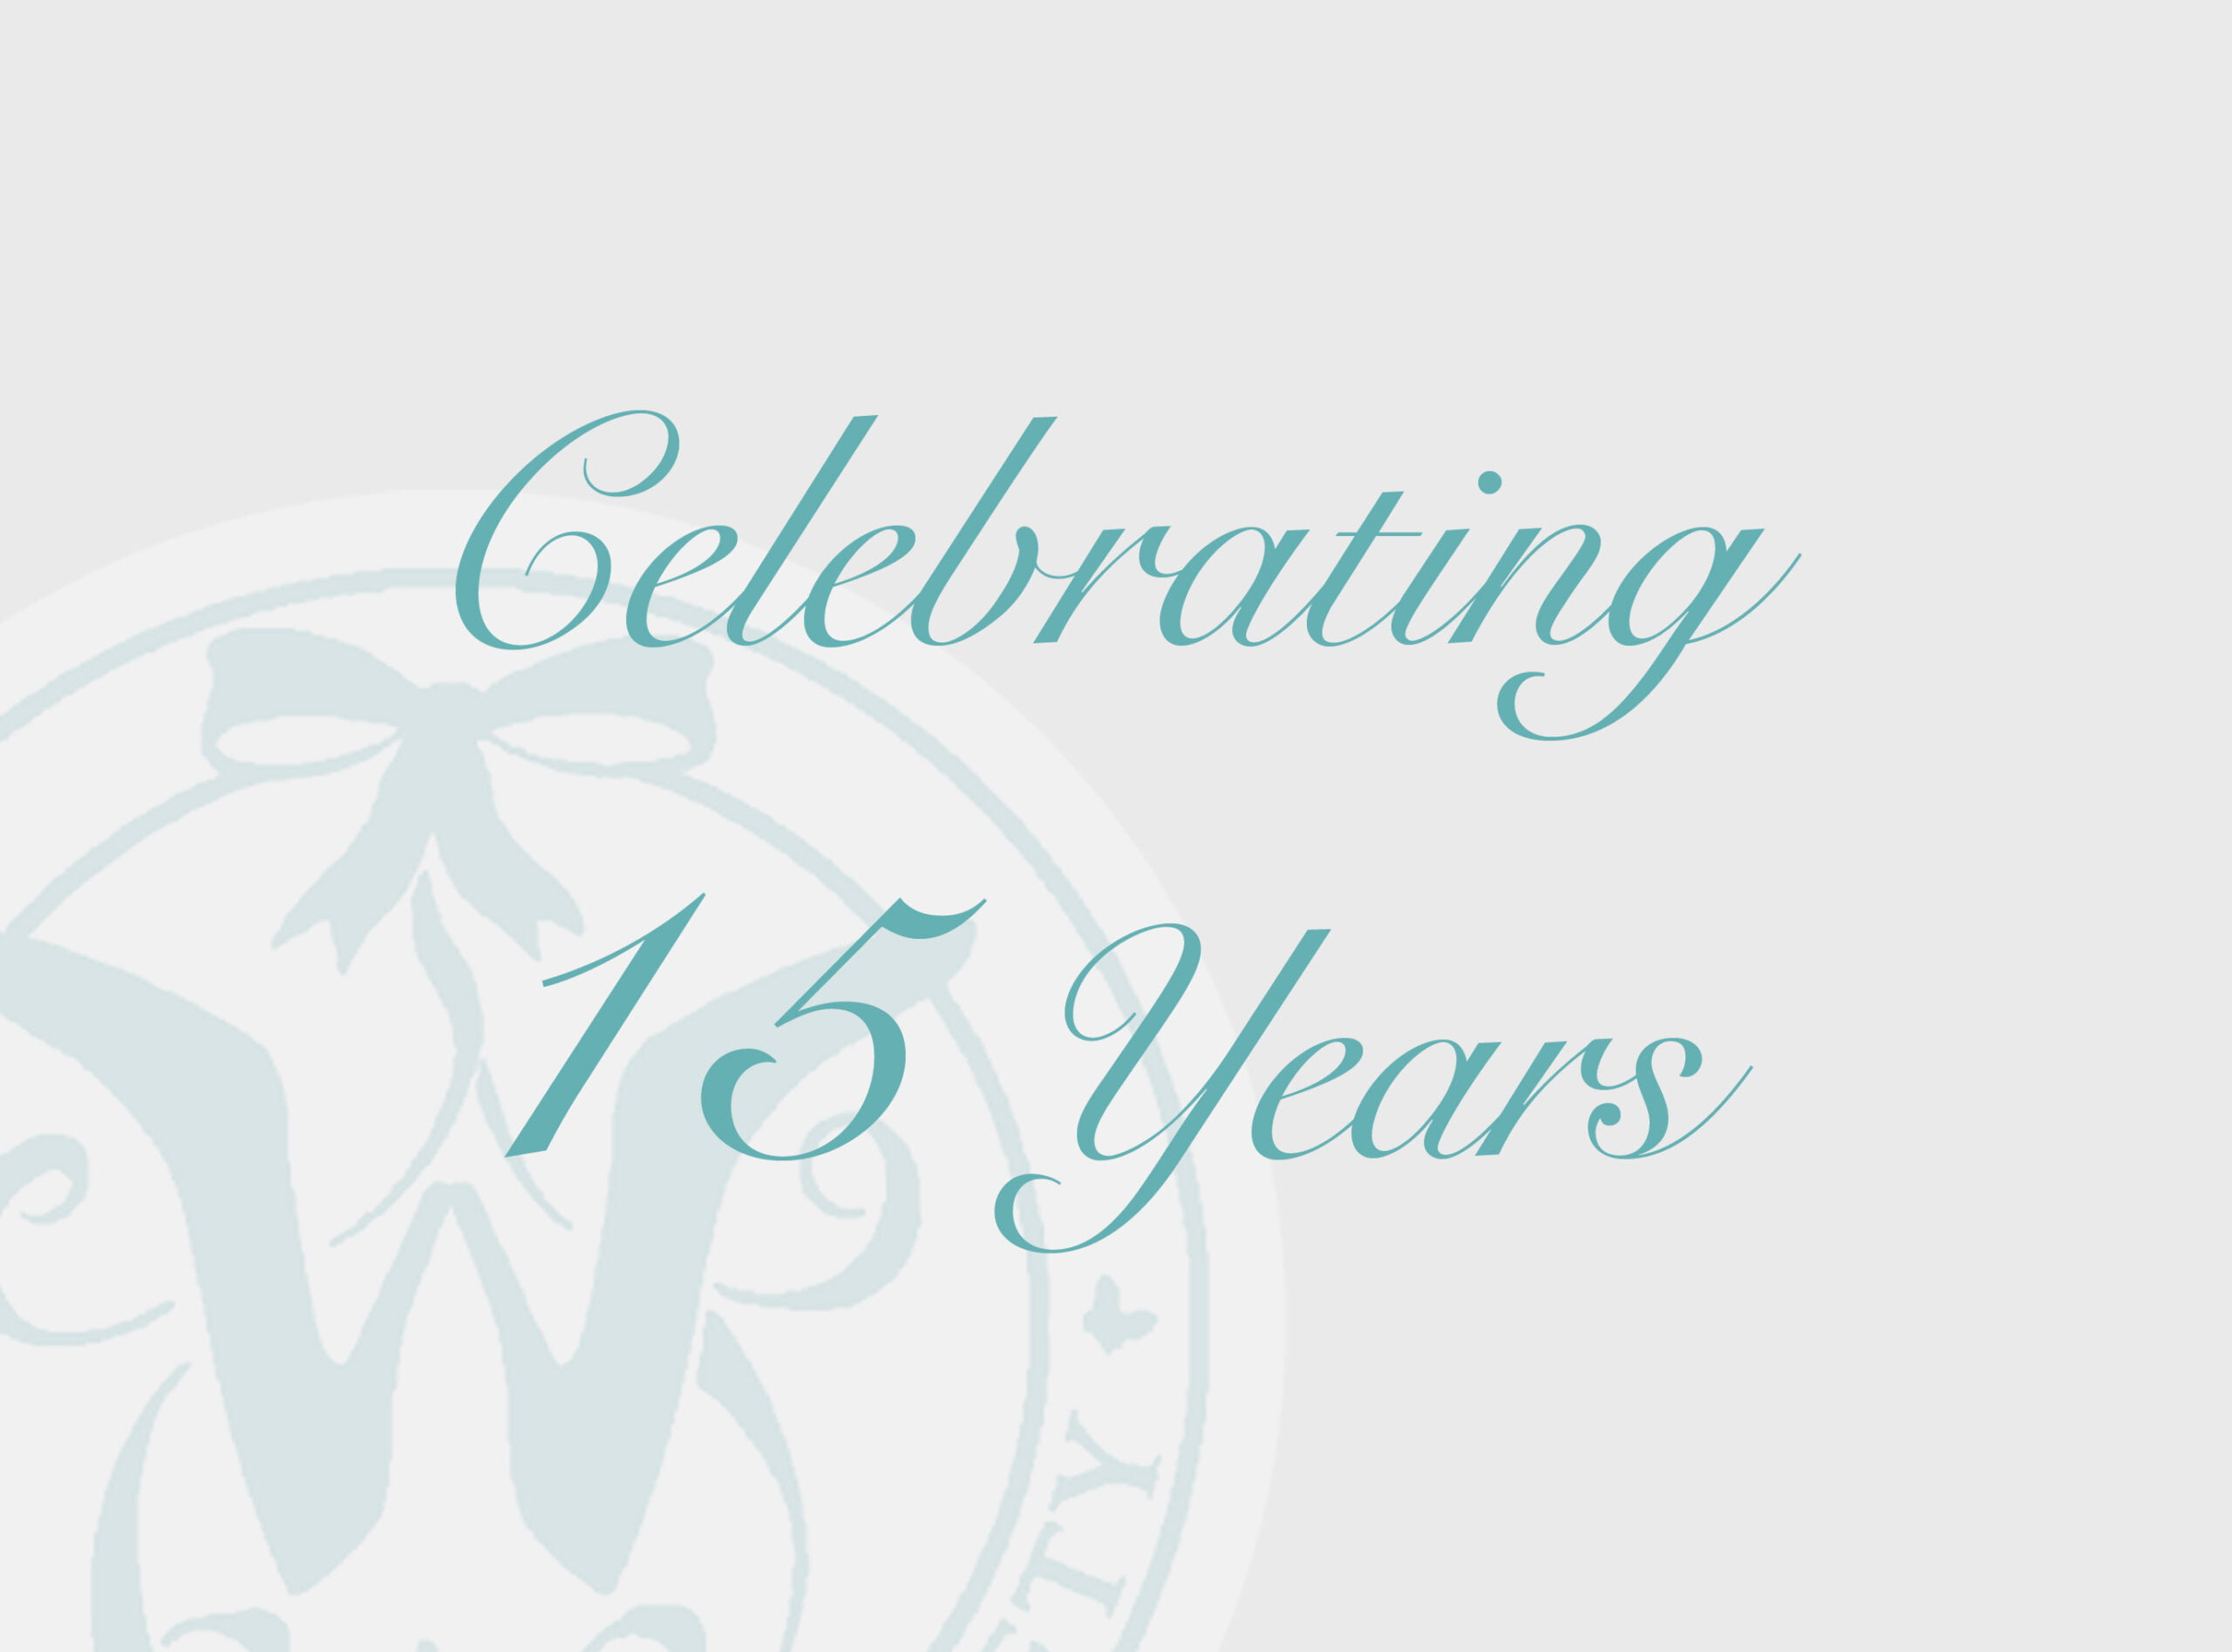 Celebrating 15 years at Women's Society Boutique